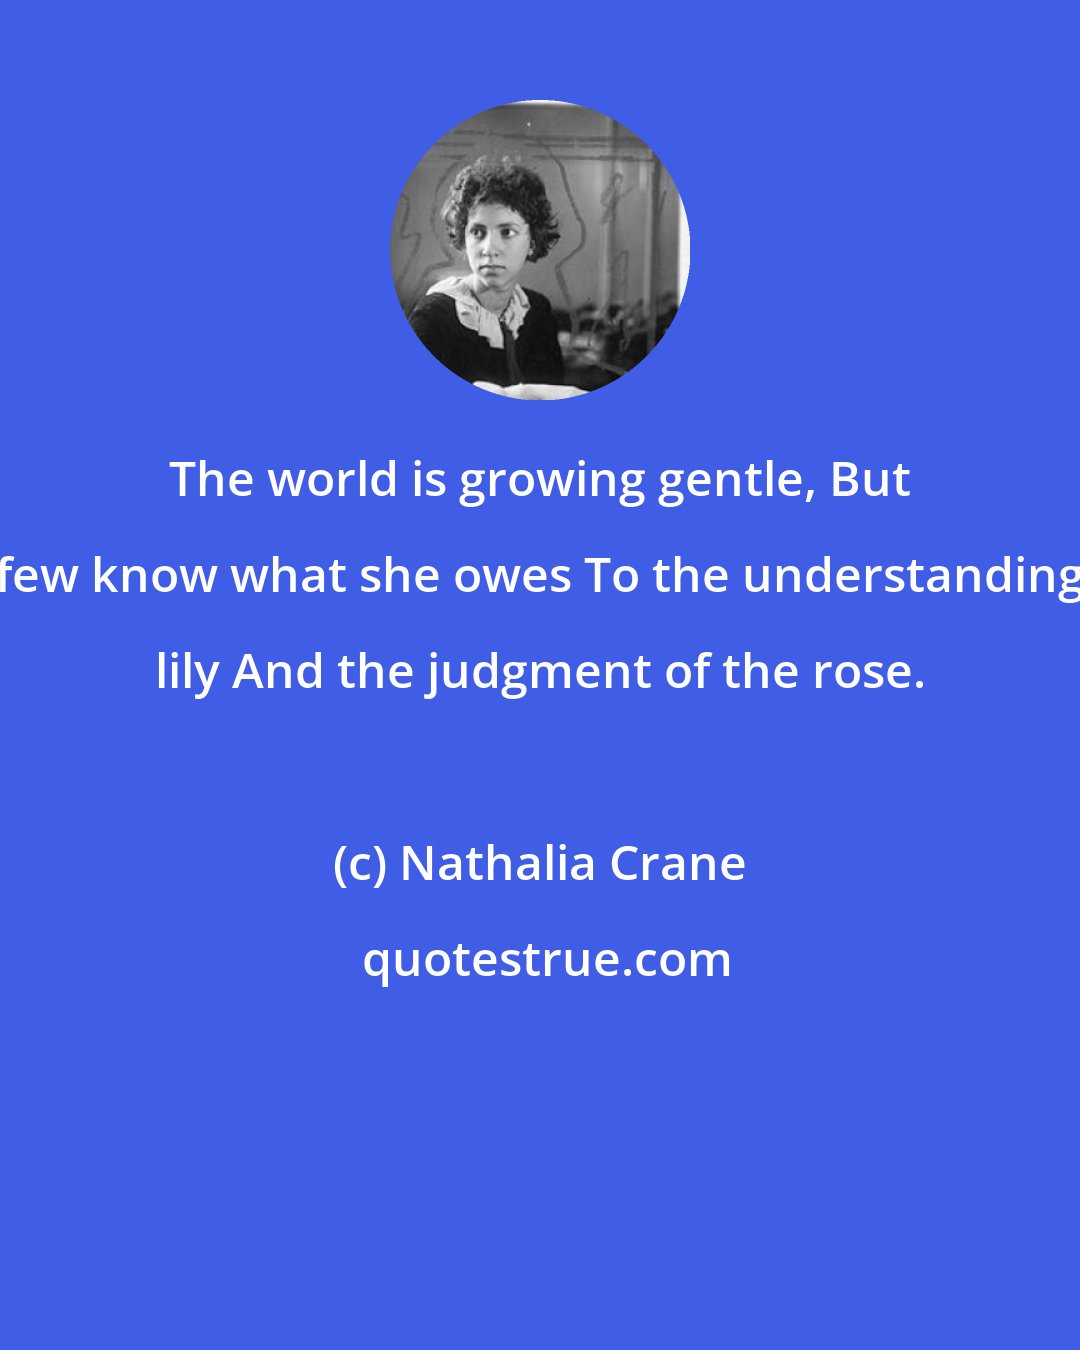 Nathalia Crane: The world is growing gentle, But few know what she owes To the understanding lily And the judgment of the rose.